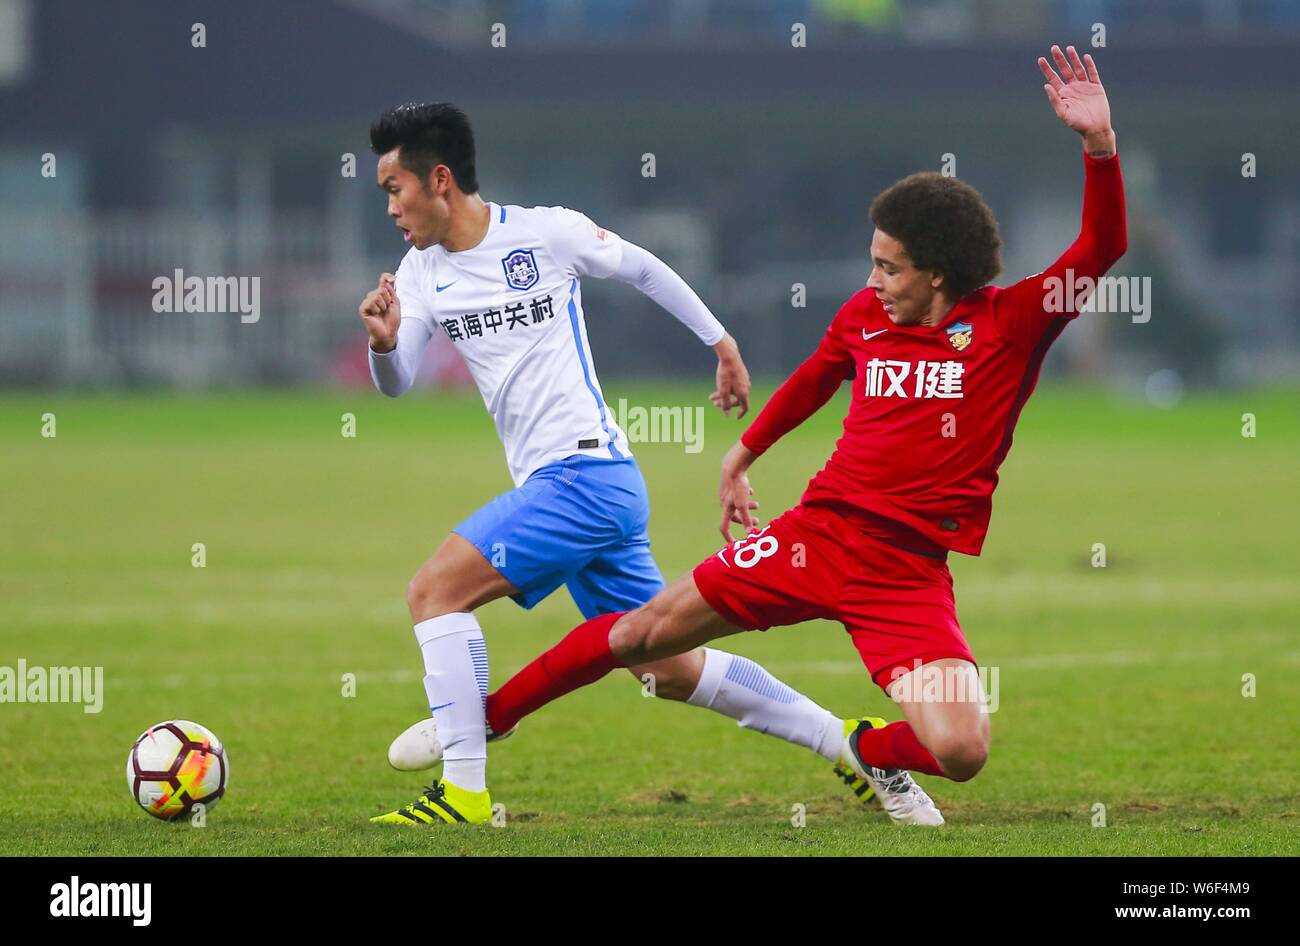 Belgian football player Axel Witsel, right, of Tianjin Quanjian challenges a player of Tianjin TEDA in their third round match during the 2018 Chinese Stock Photo